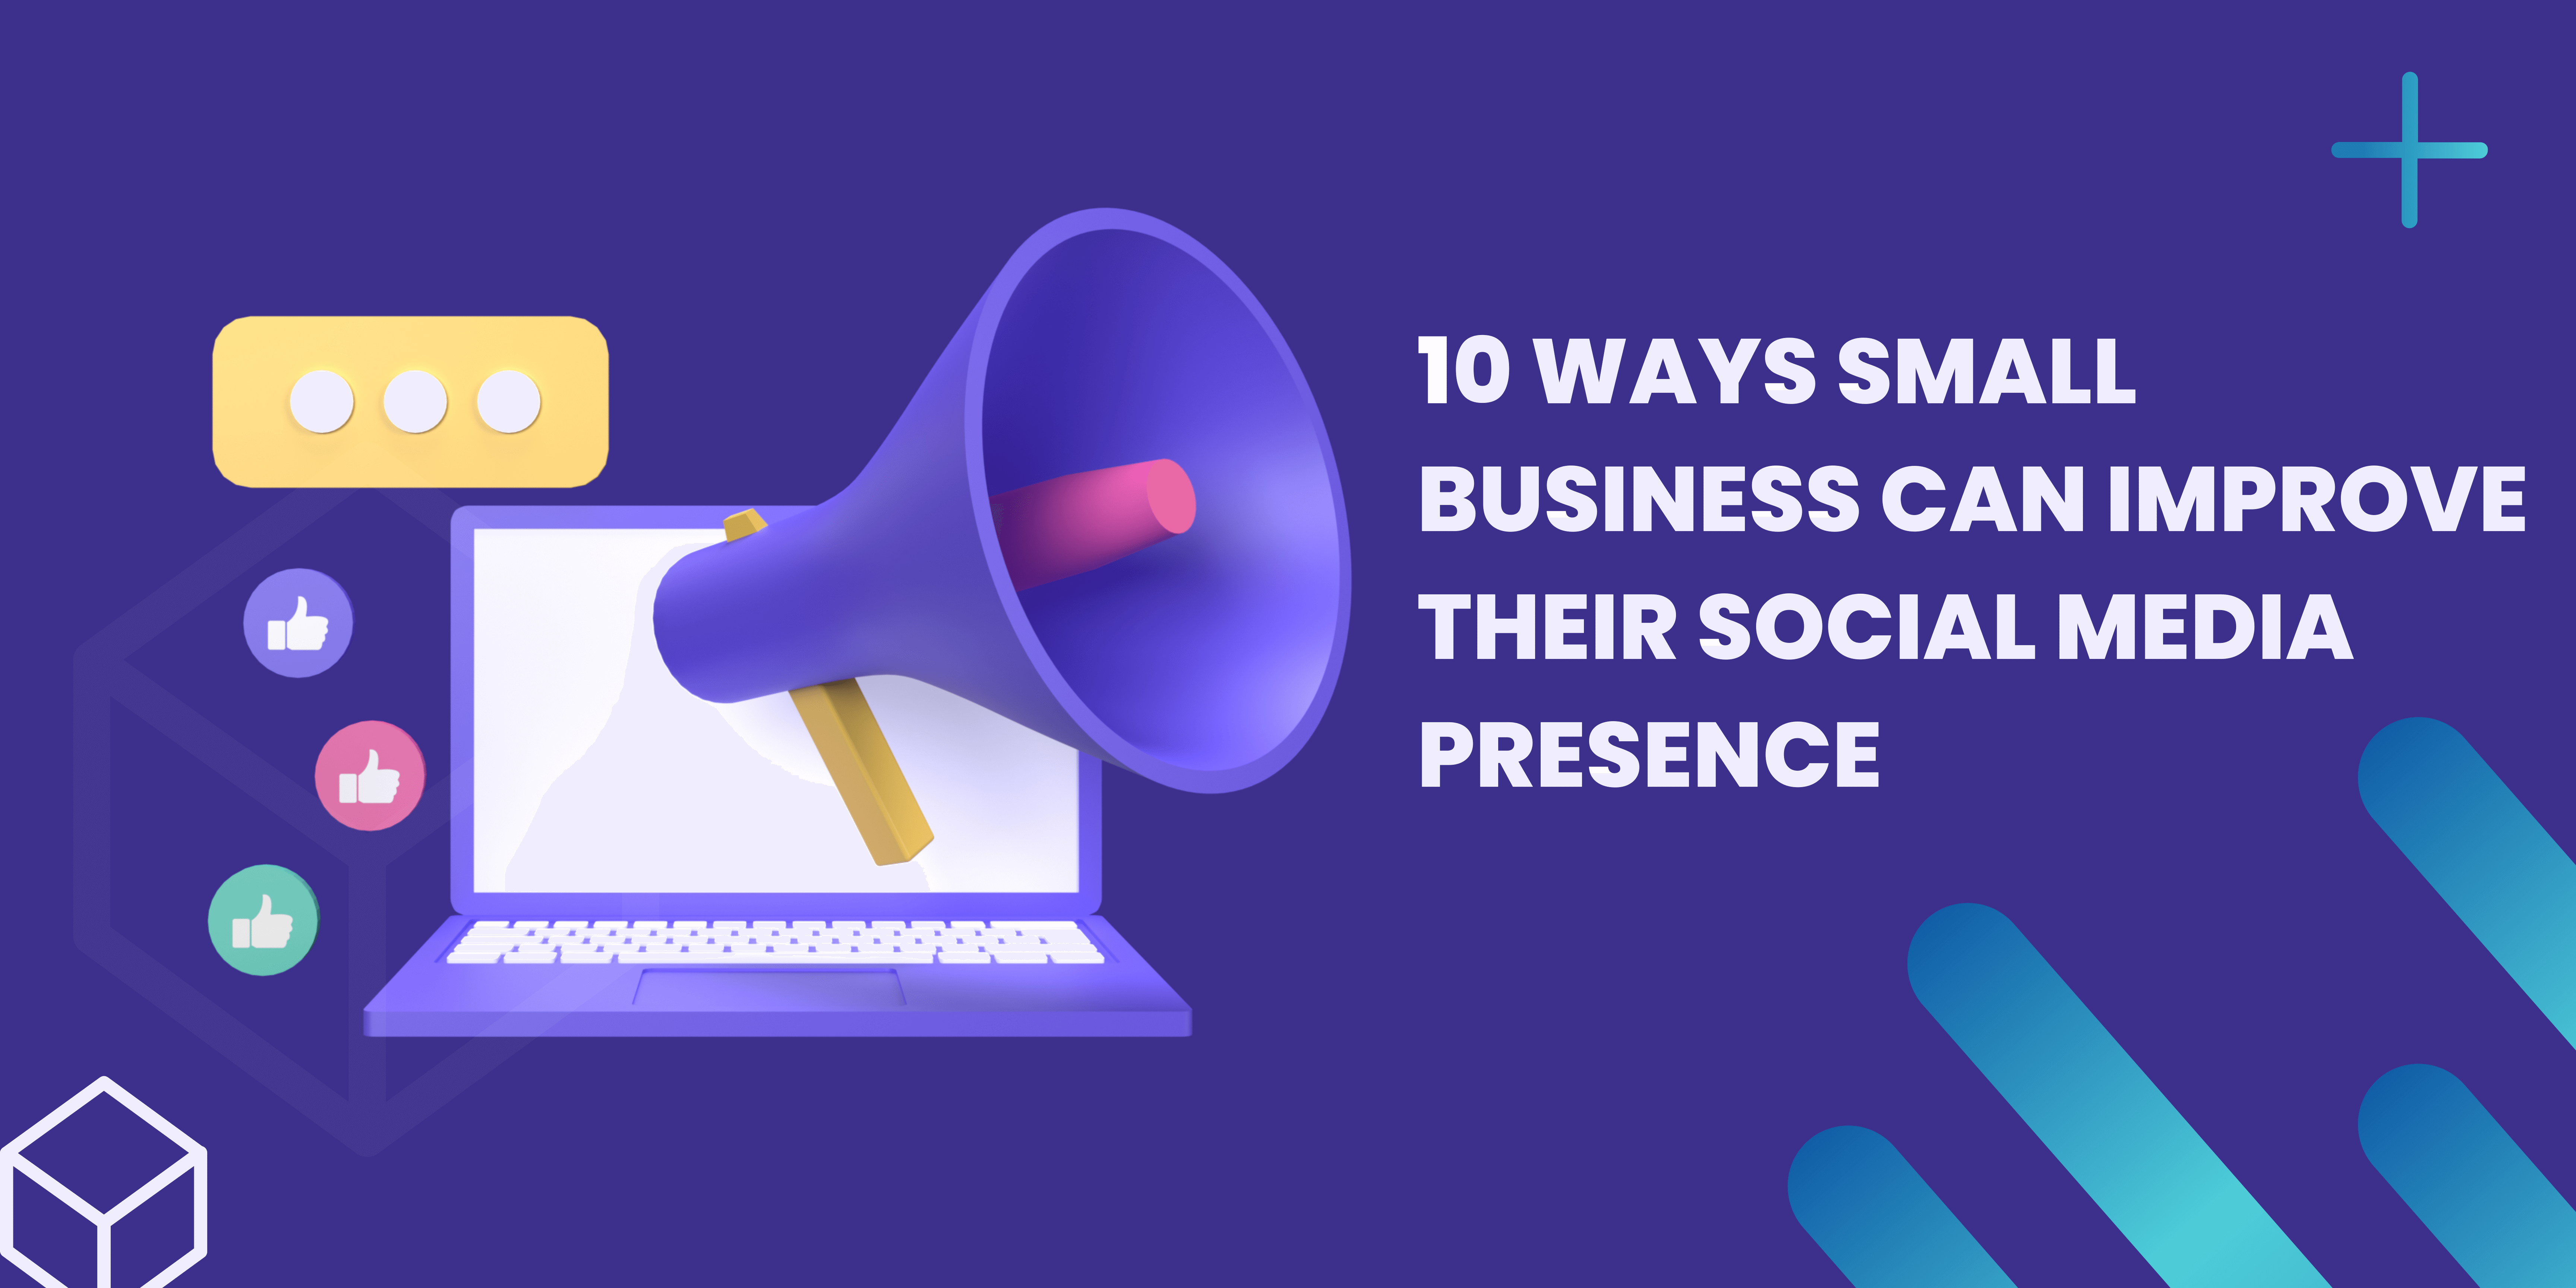 10 Ways small business can improve their social media presence